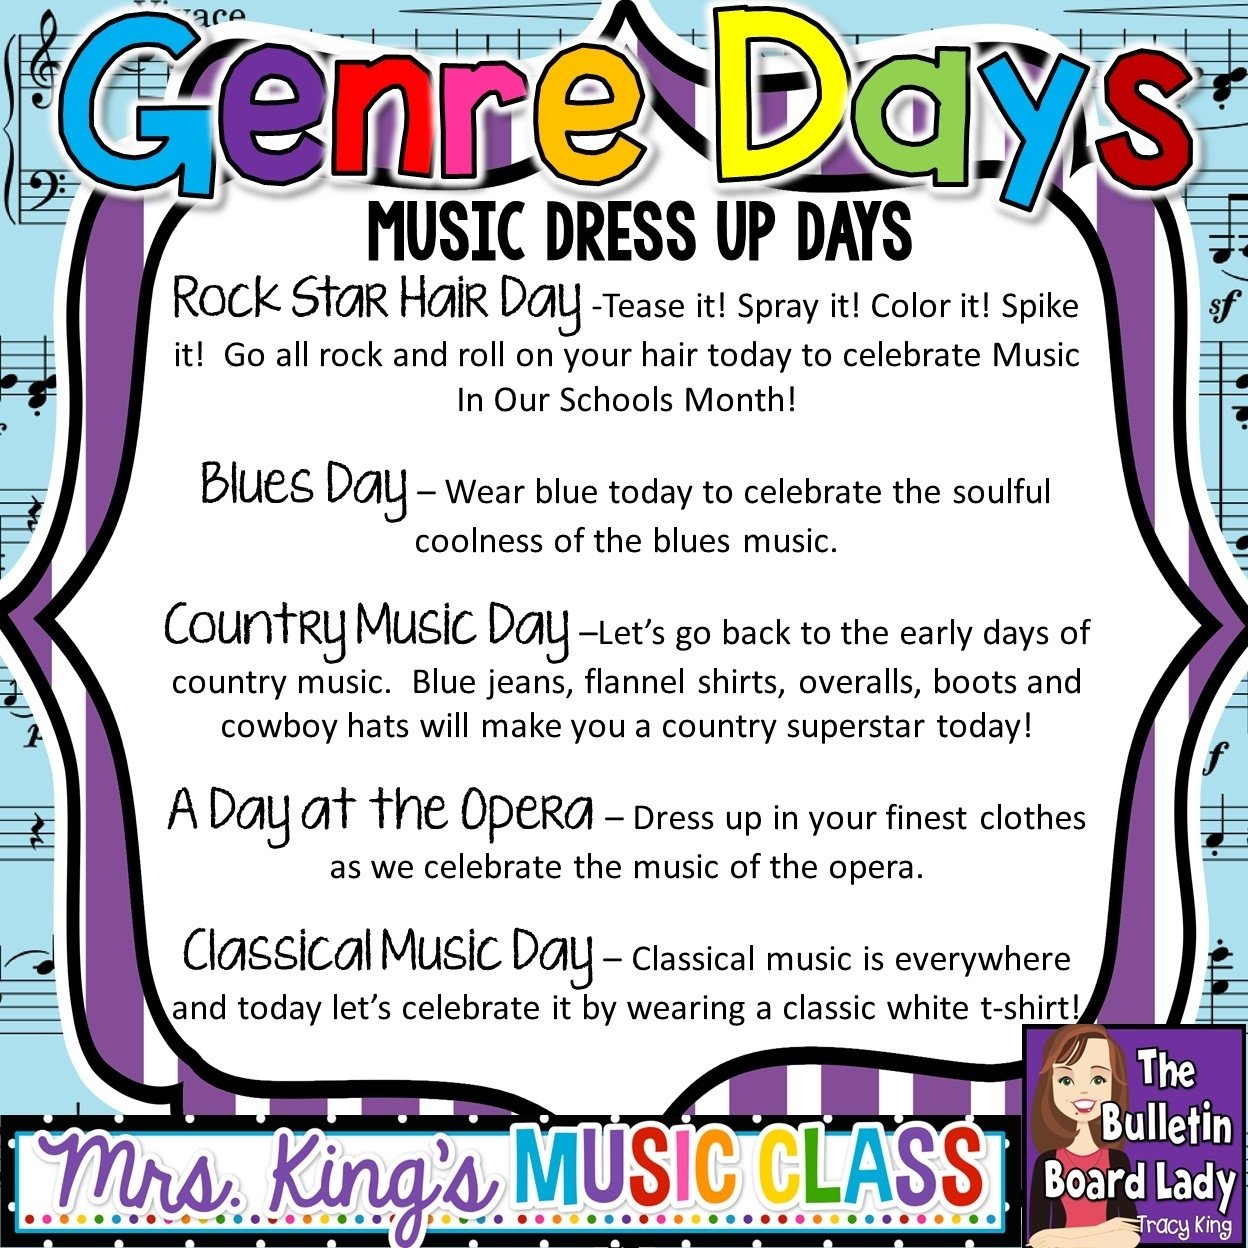 10 Fashionable Spirit Day Dress Up Ideas mrs kings music class spirit days for music in our schools month 2022